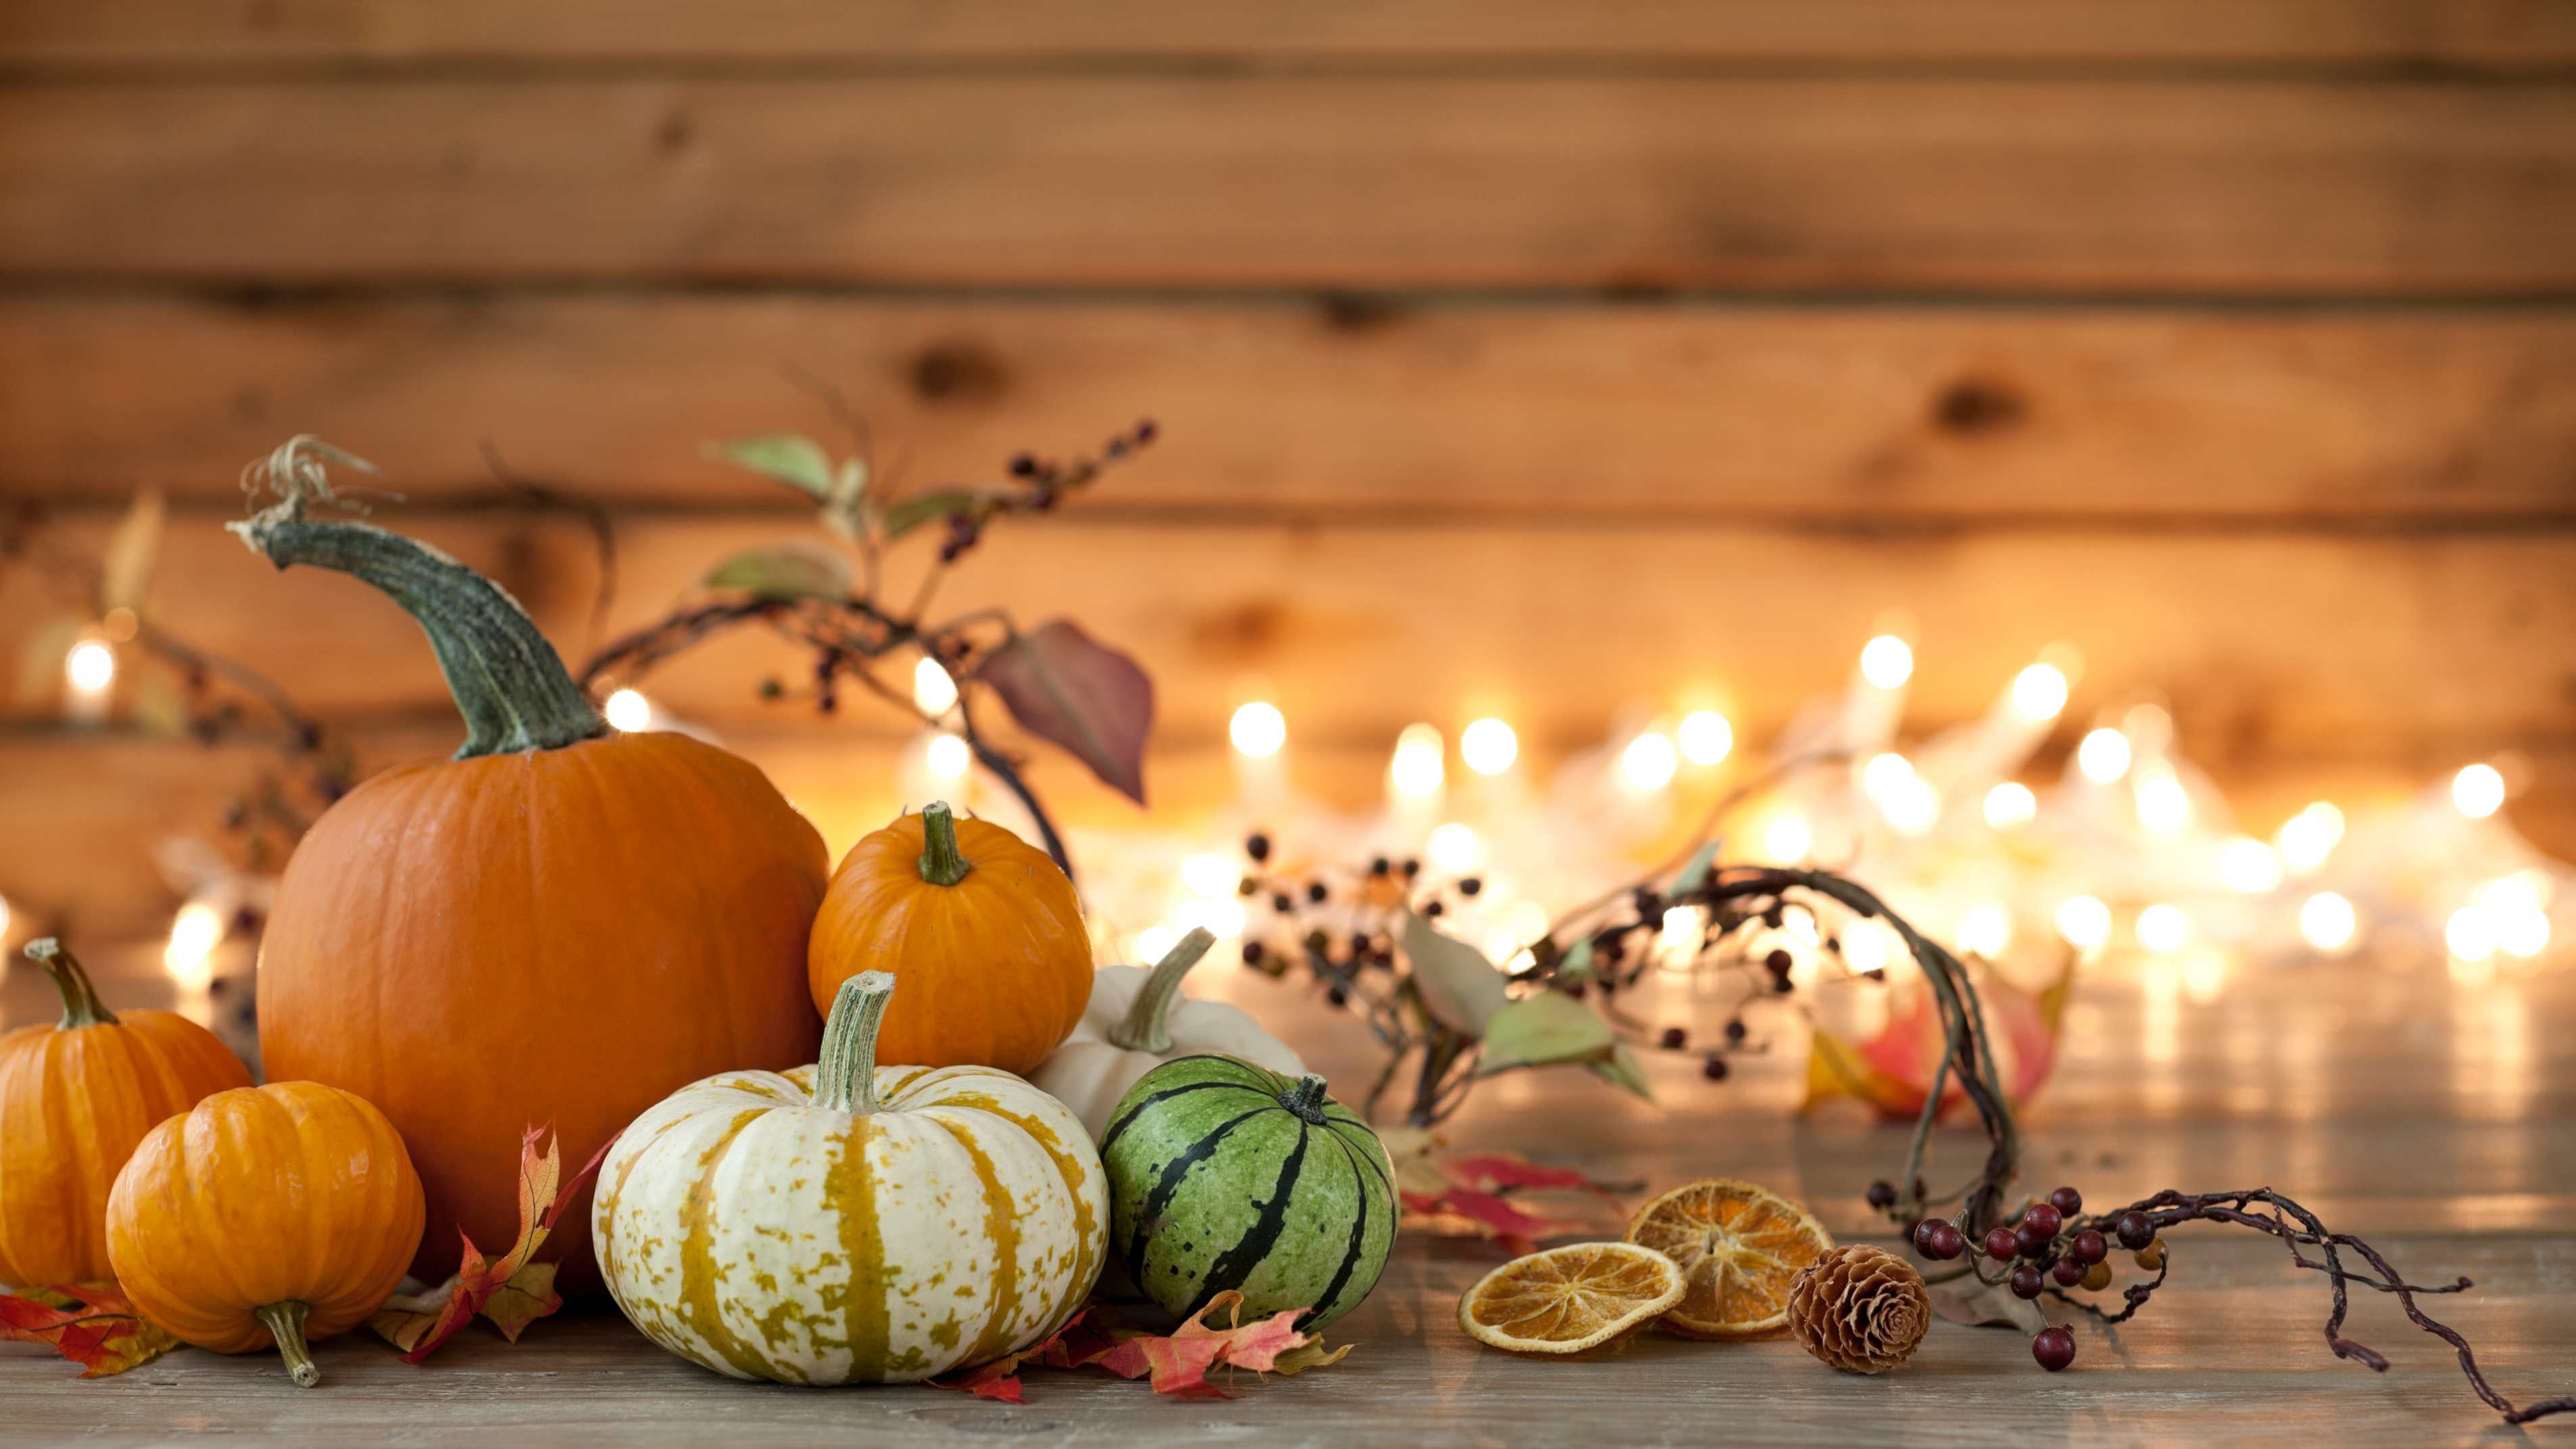 s Early Black Friday Sale: The Best Deals on Cute Fall Decor